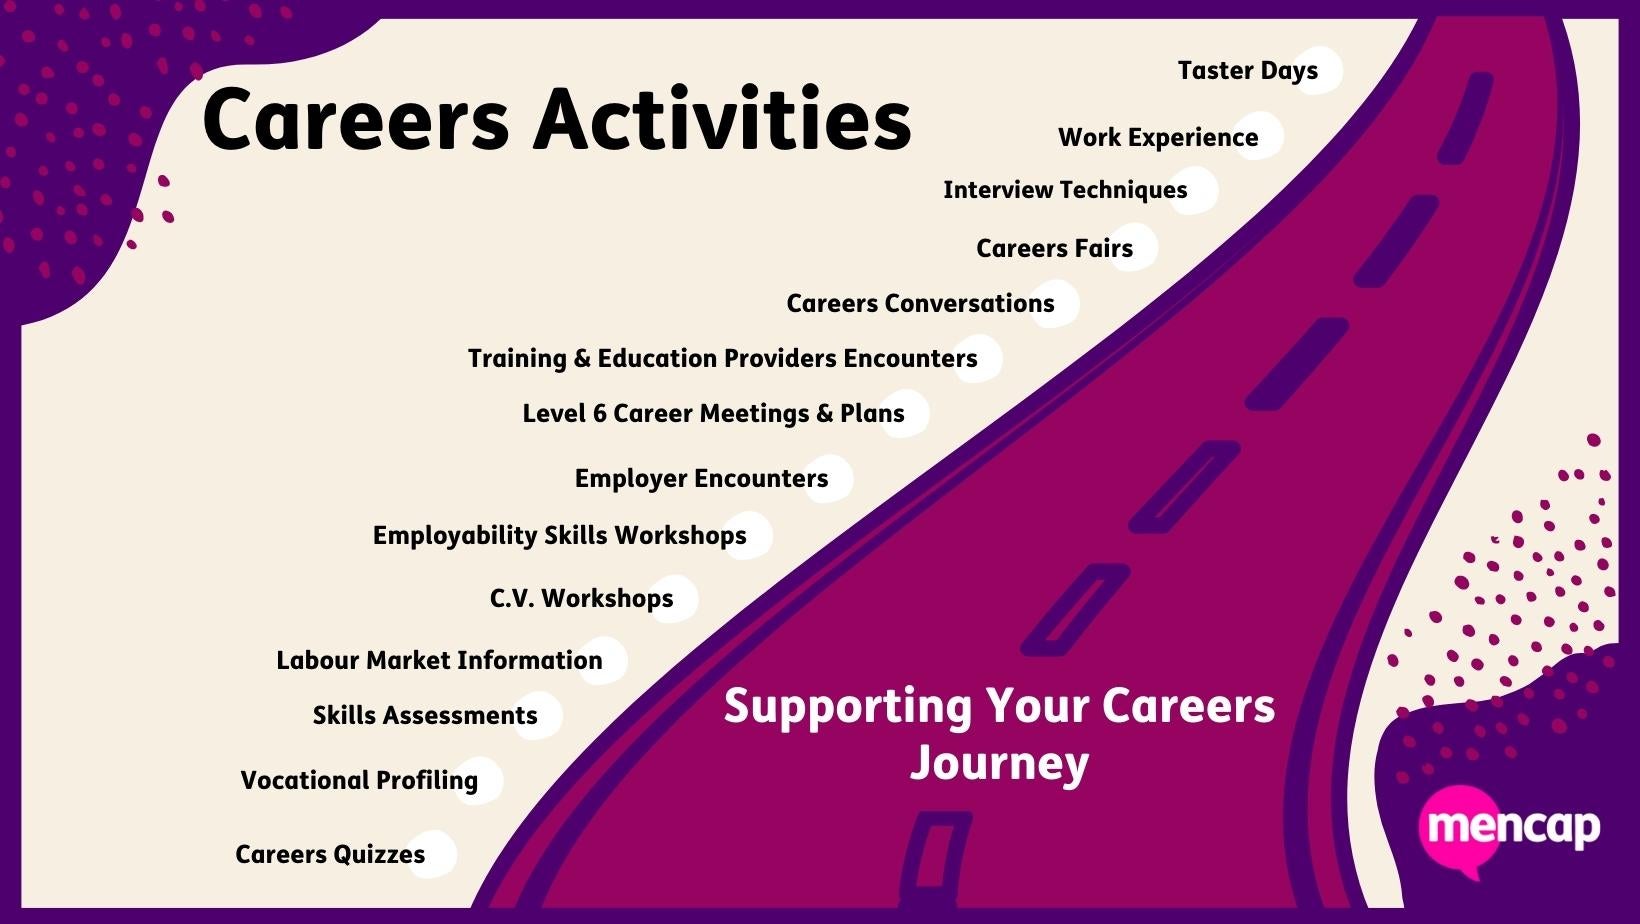 A graphic design of the list of careers activities provided by the Mencap employment services